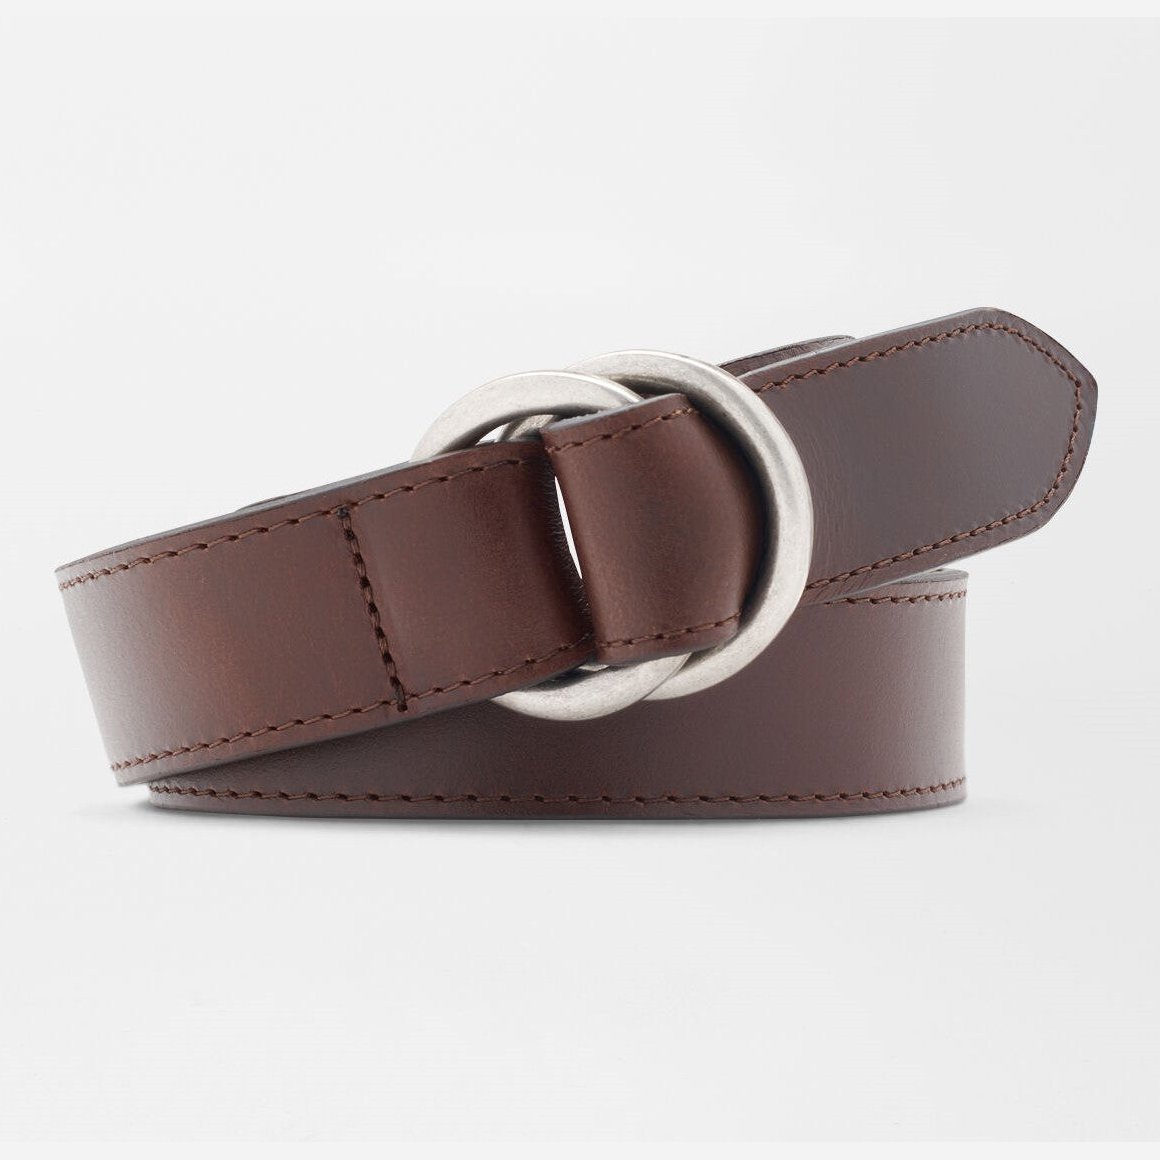 Peter Millar Vintage Leather O-Ring Belt in Chocolate